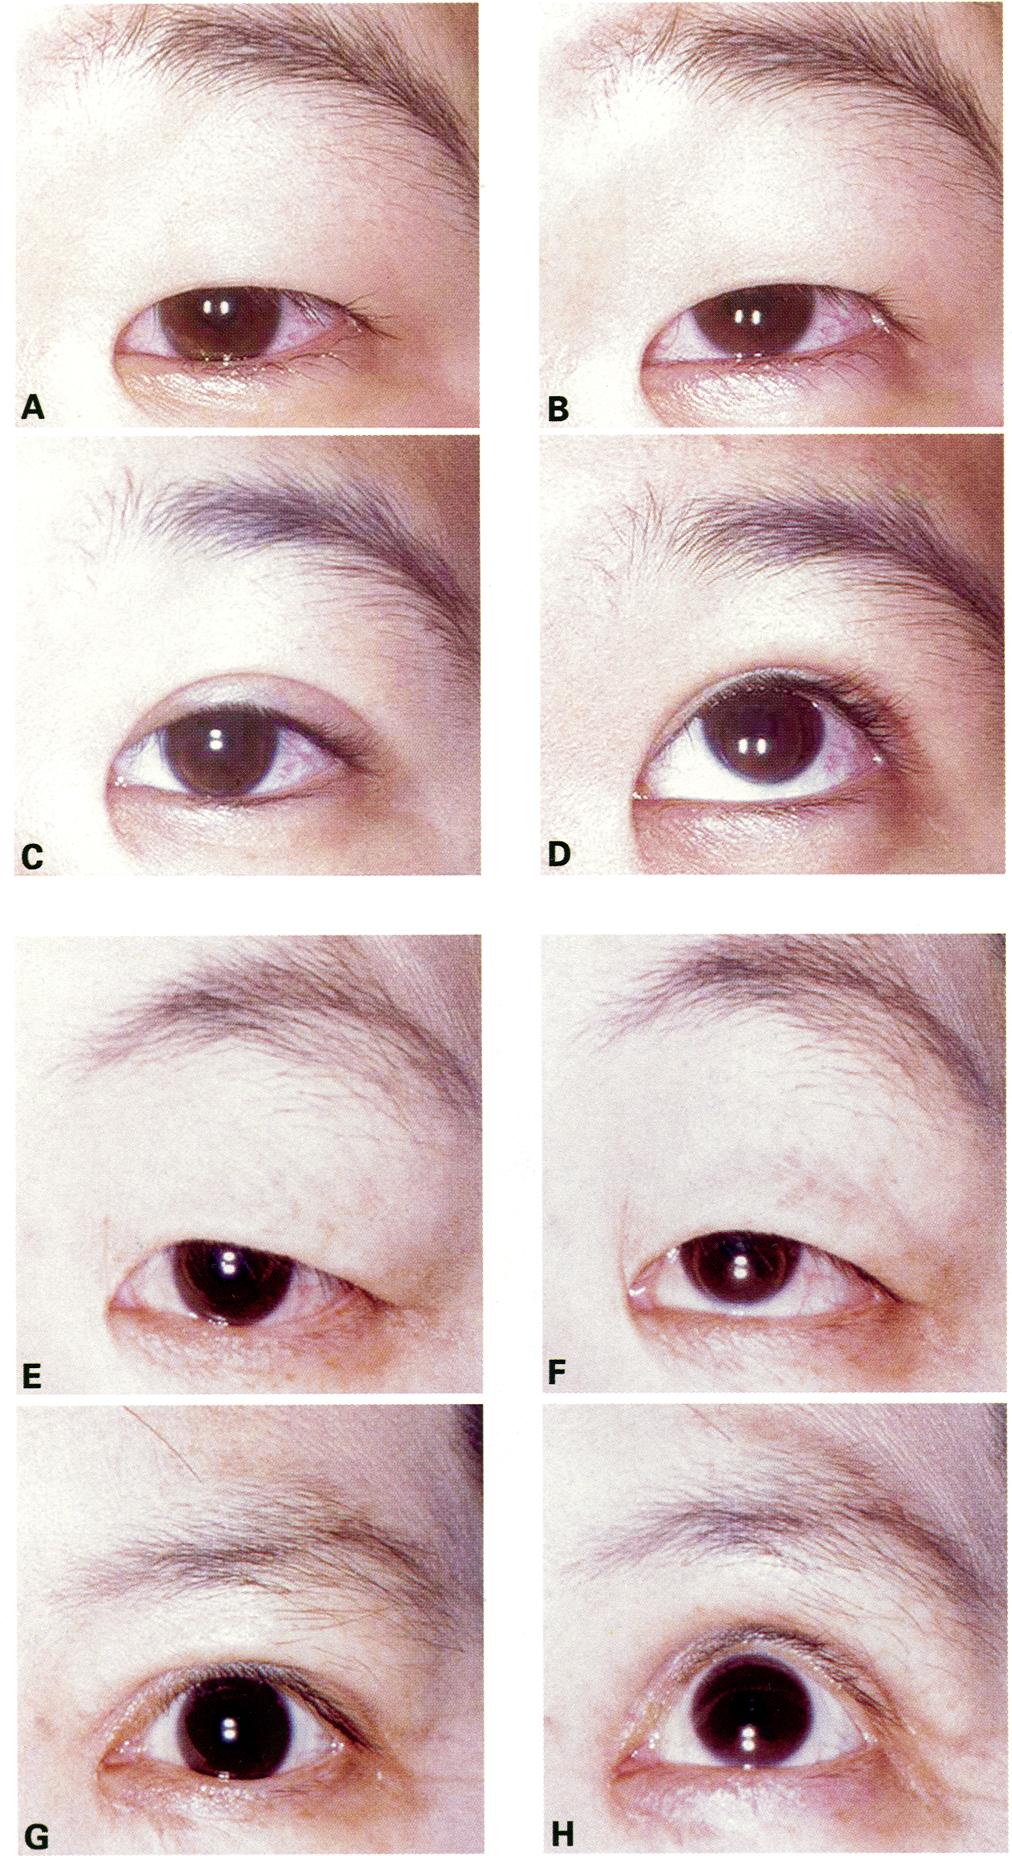 Retraction of the upper eyelid during upward gazing is restricted compared with that during primary gazing.